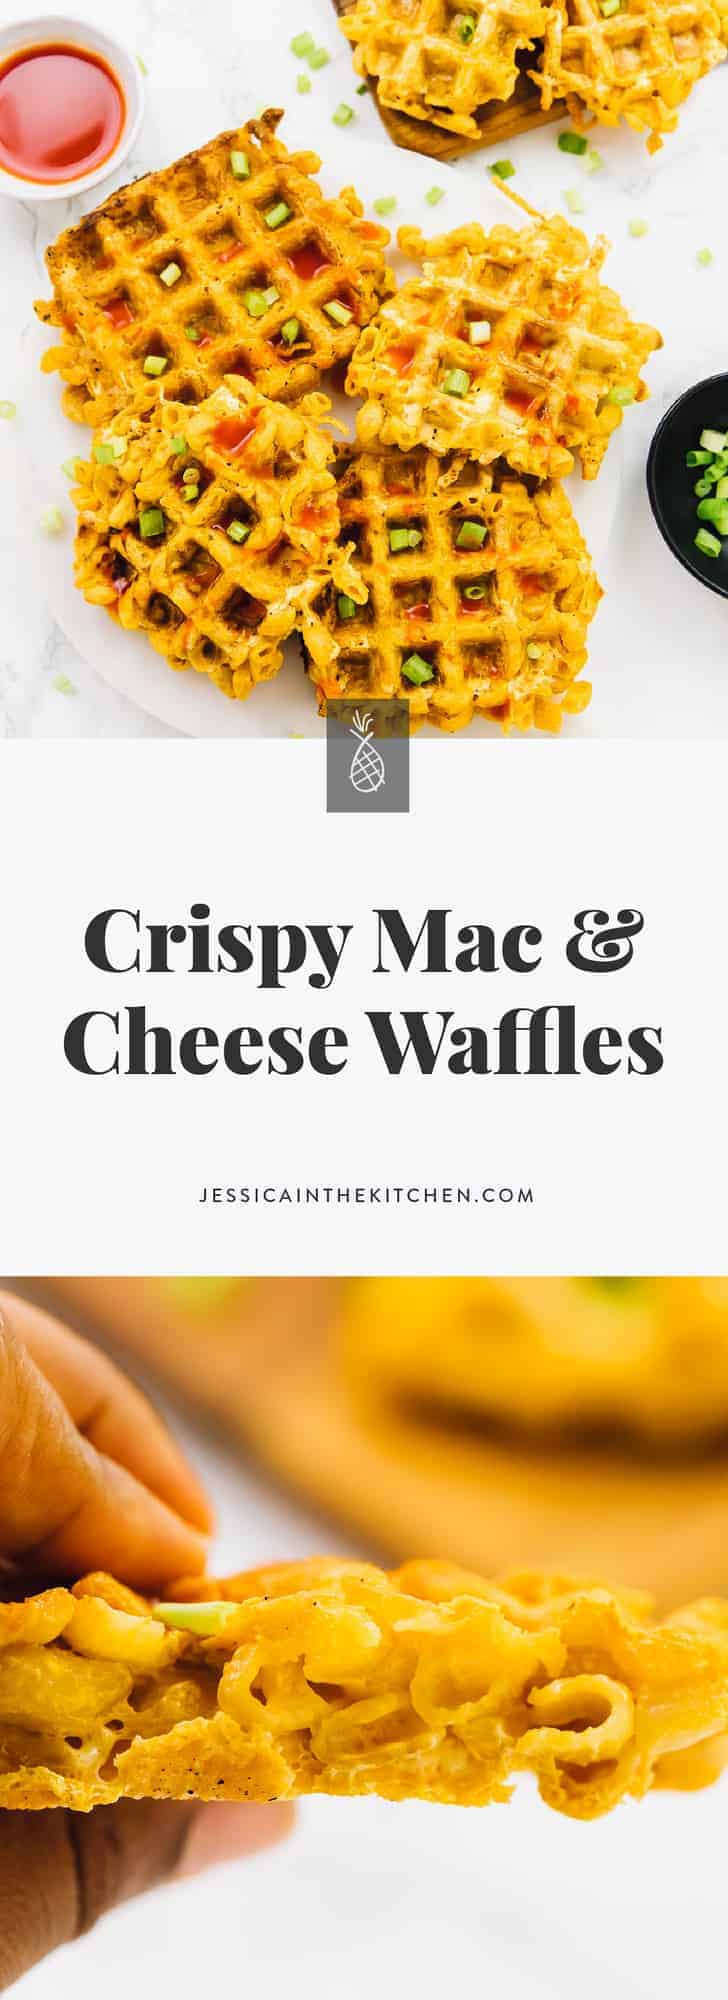 These Crispy Mac and Cheeze Waffles are the perfect indulgent side dish! Two ingredients, and you get crisp on the outside, and soft cheesy Mac and cheese on the inside of these divine waffles!